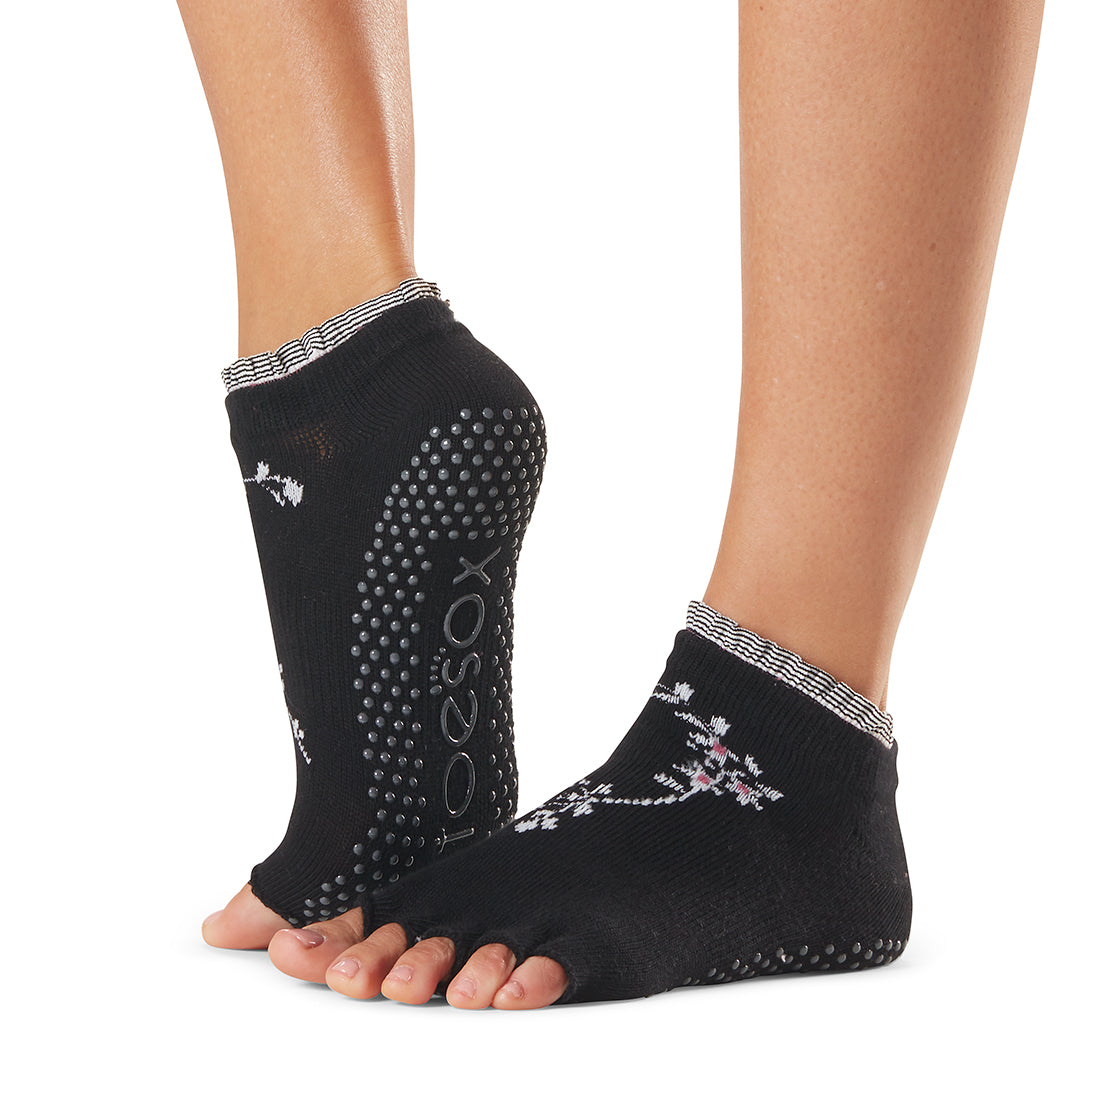 ToeSox - Low Rise Grip Socks - SPRING 2020 - T8 Fitness - Asia Yoga,  Pilates, Rehab, Fitness Products